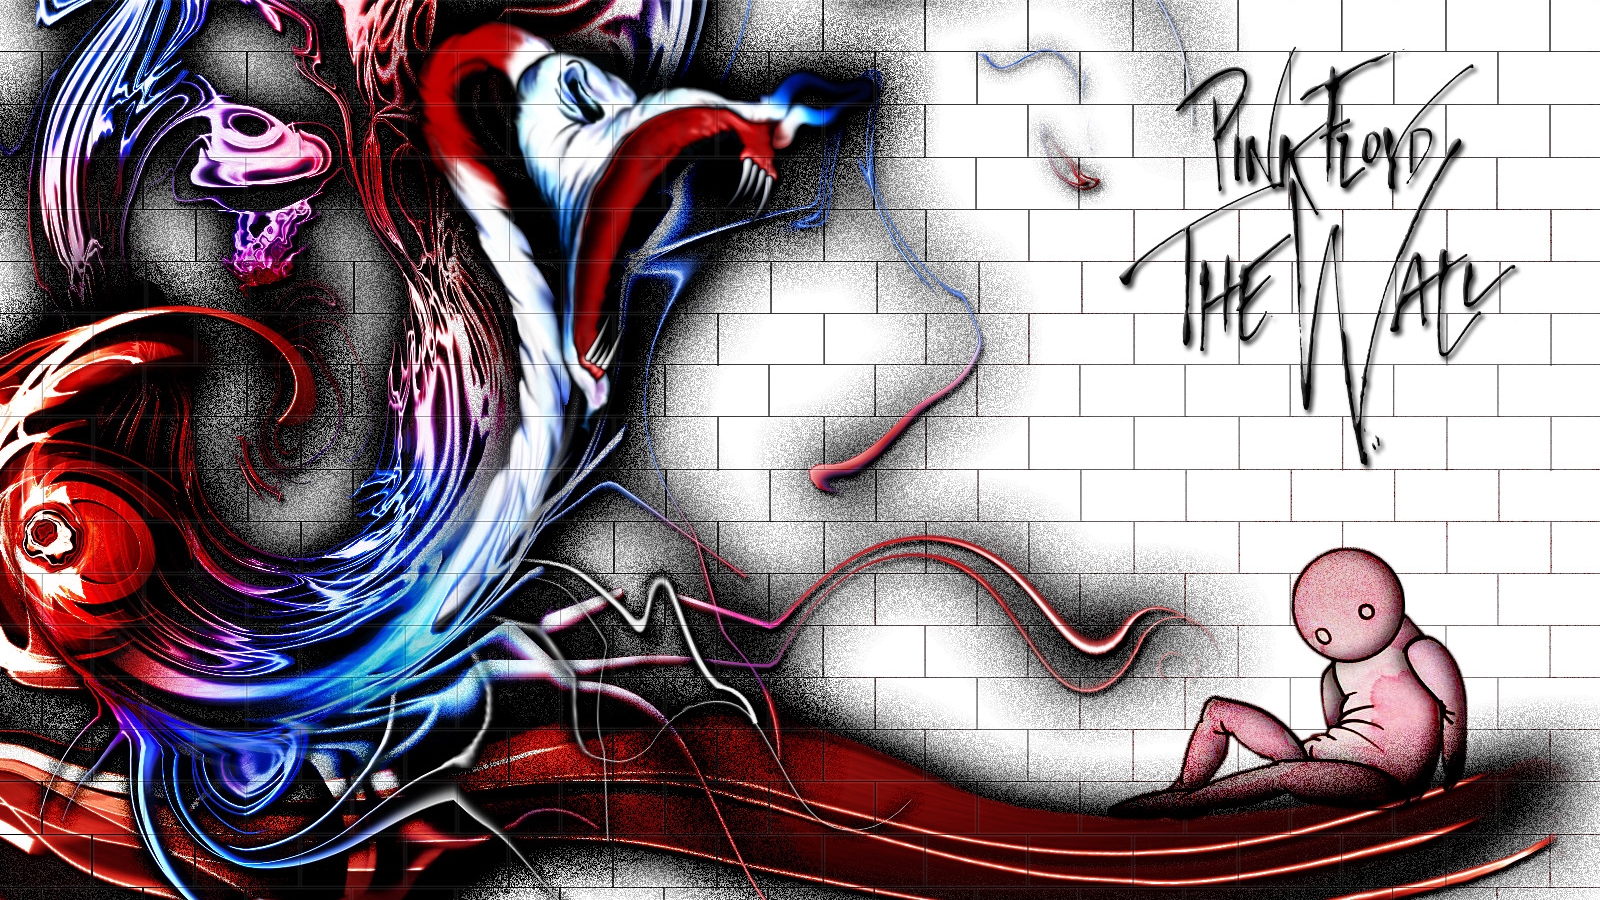 cuisine, music and art: Pink Floyd The Wall